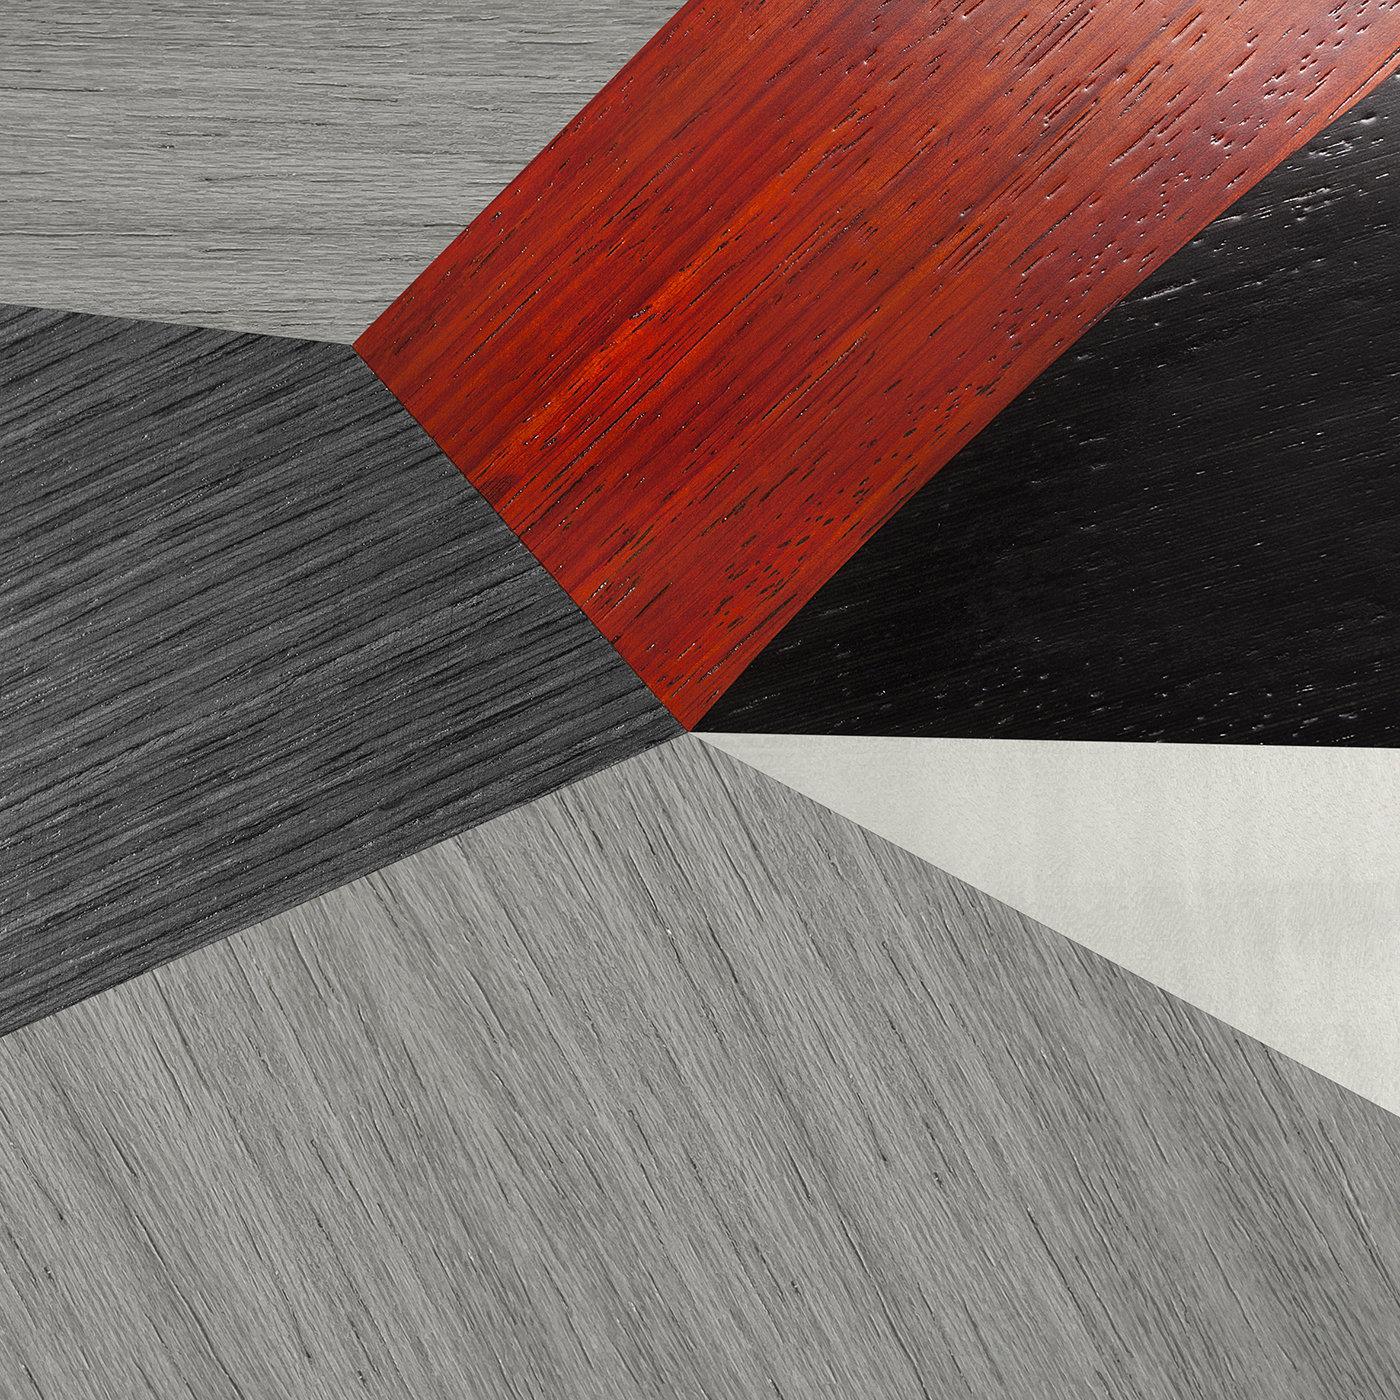 Part of the Torino e il Futurismo Collection, this exquisite coffee table will make a stunning centerpiece of any living room ensemble. Characterized by abstract design in bold color combination of white, black, red, and gray, the top is crafted of